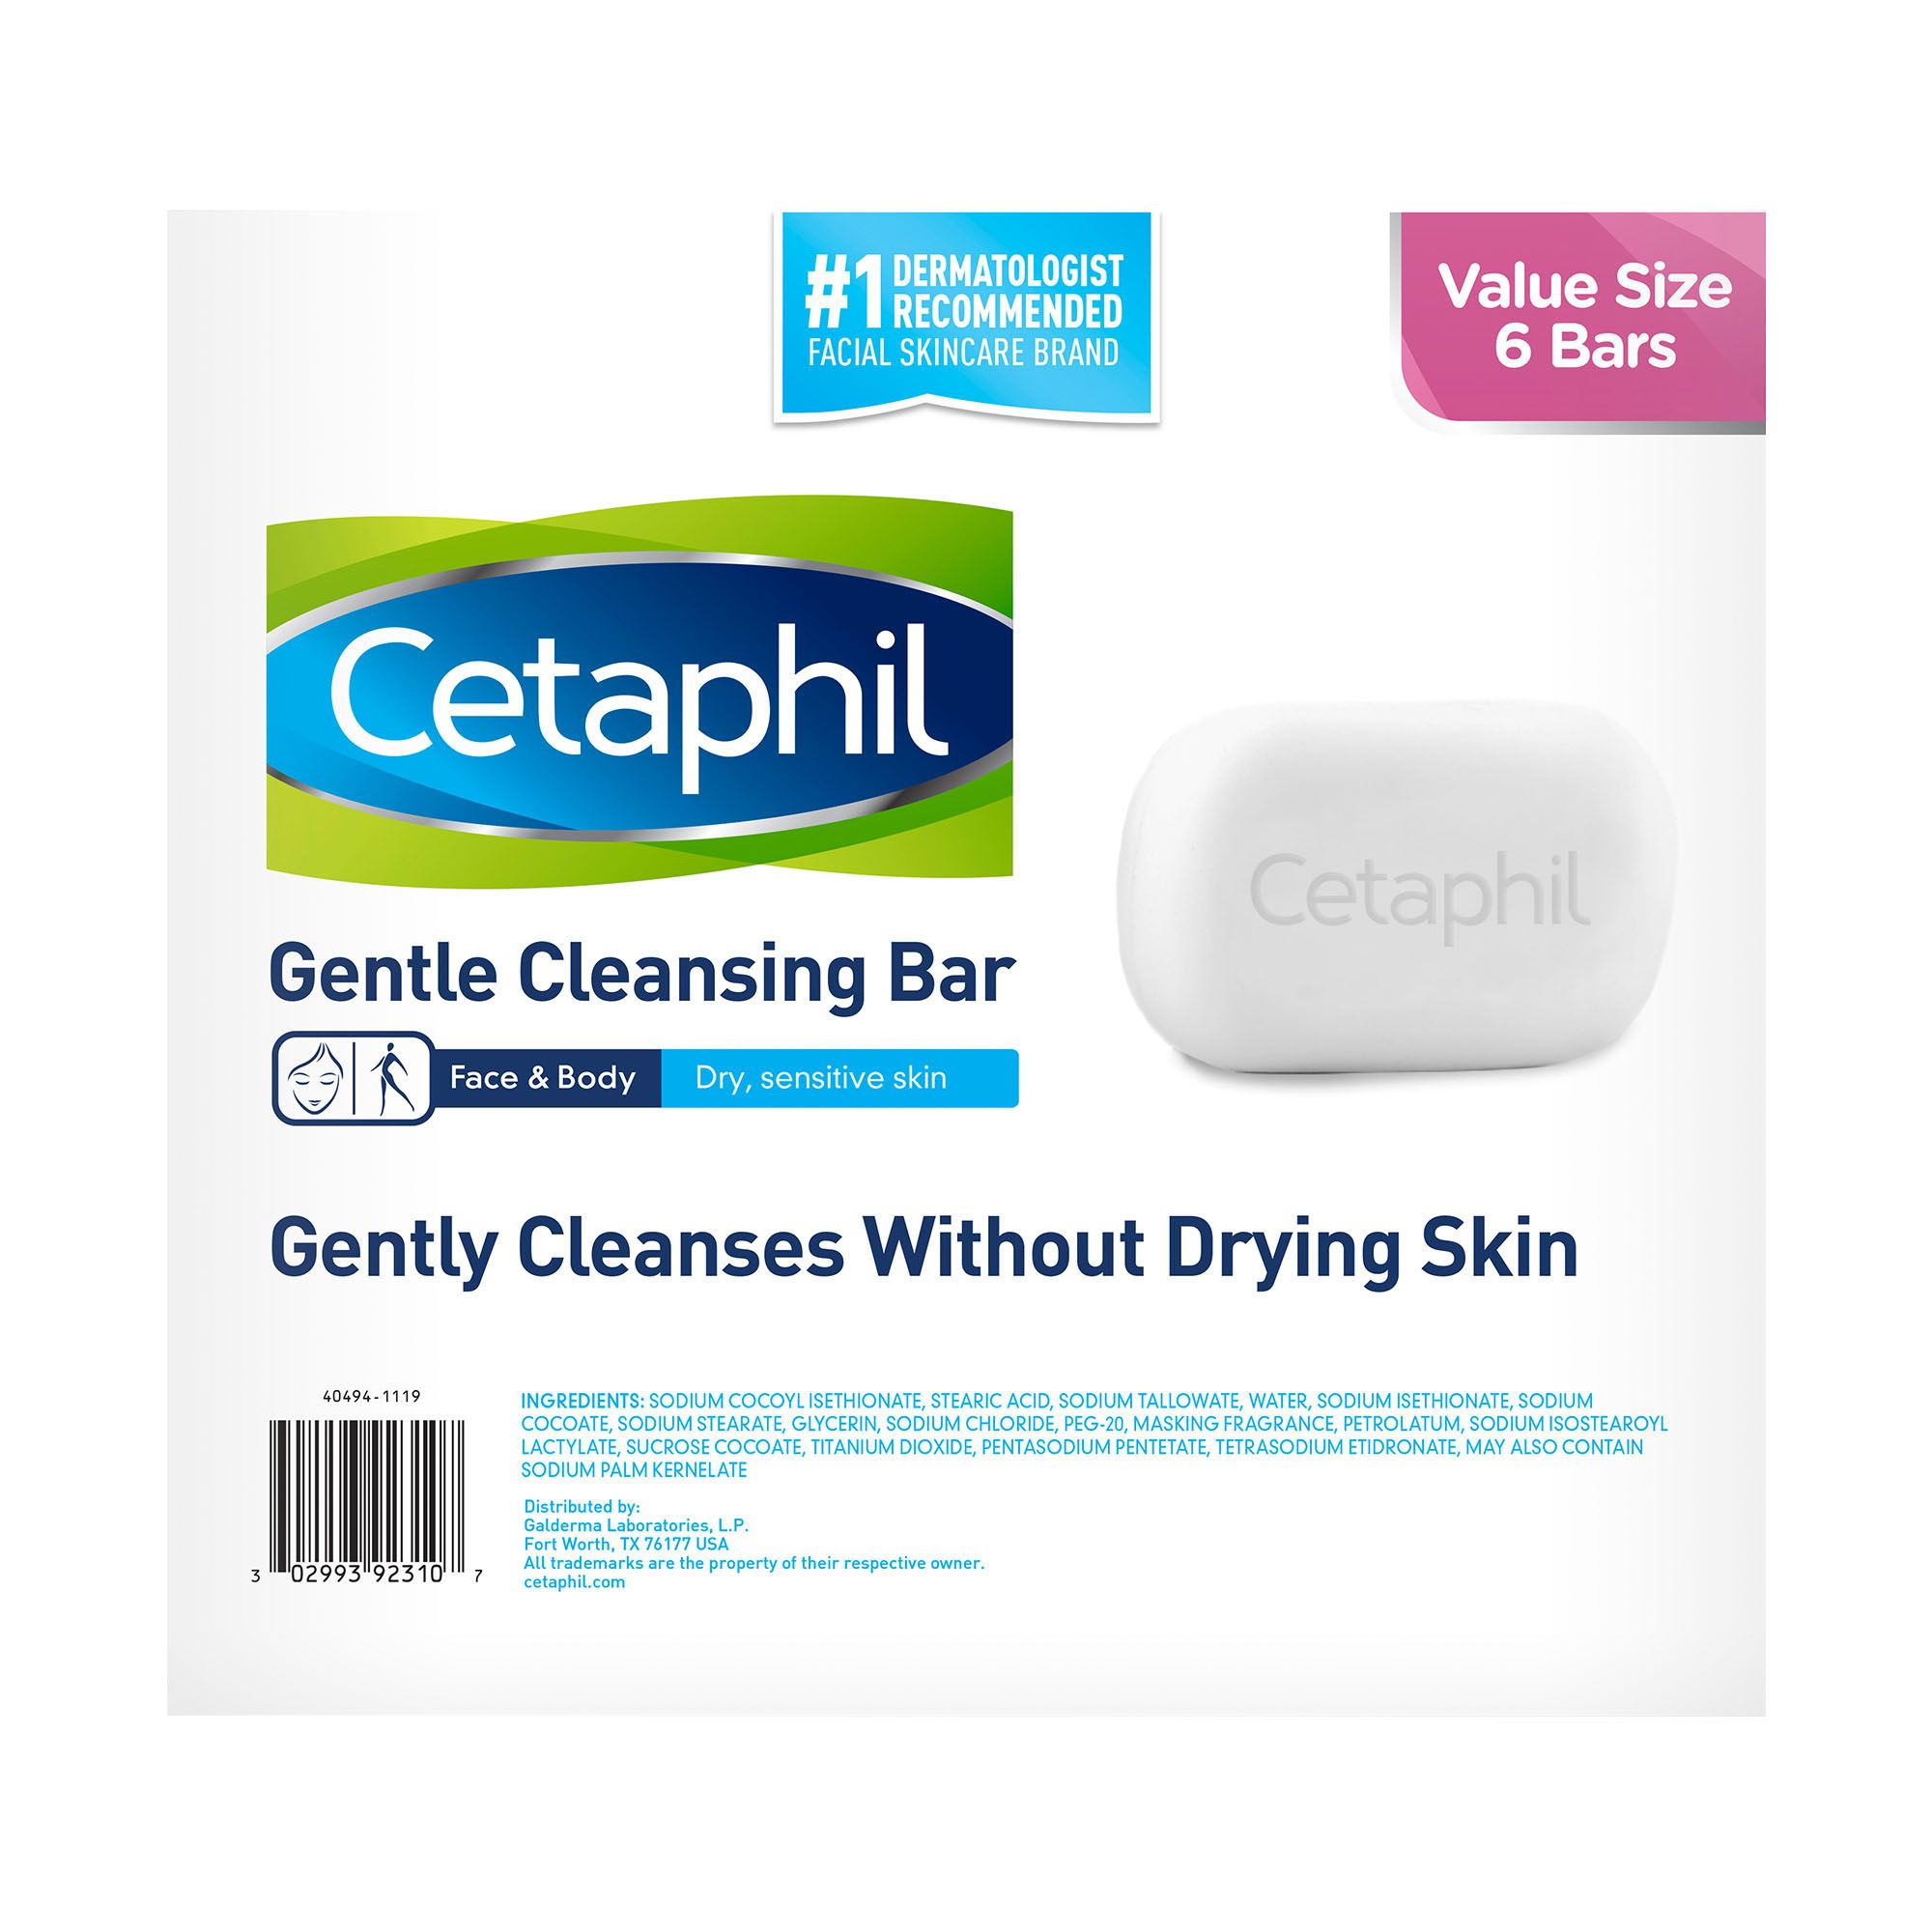 cetaphil bar soap for baby price